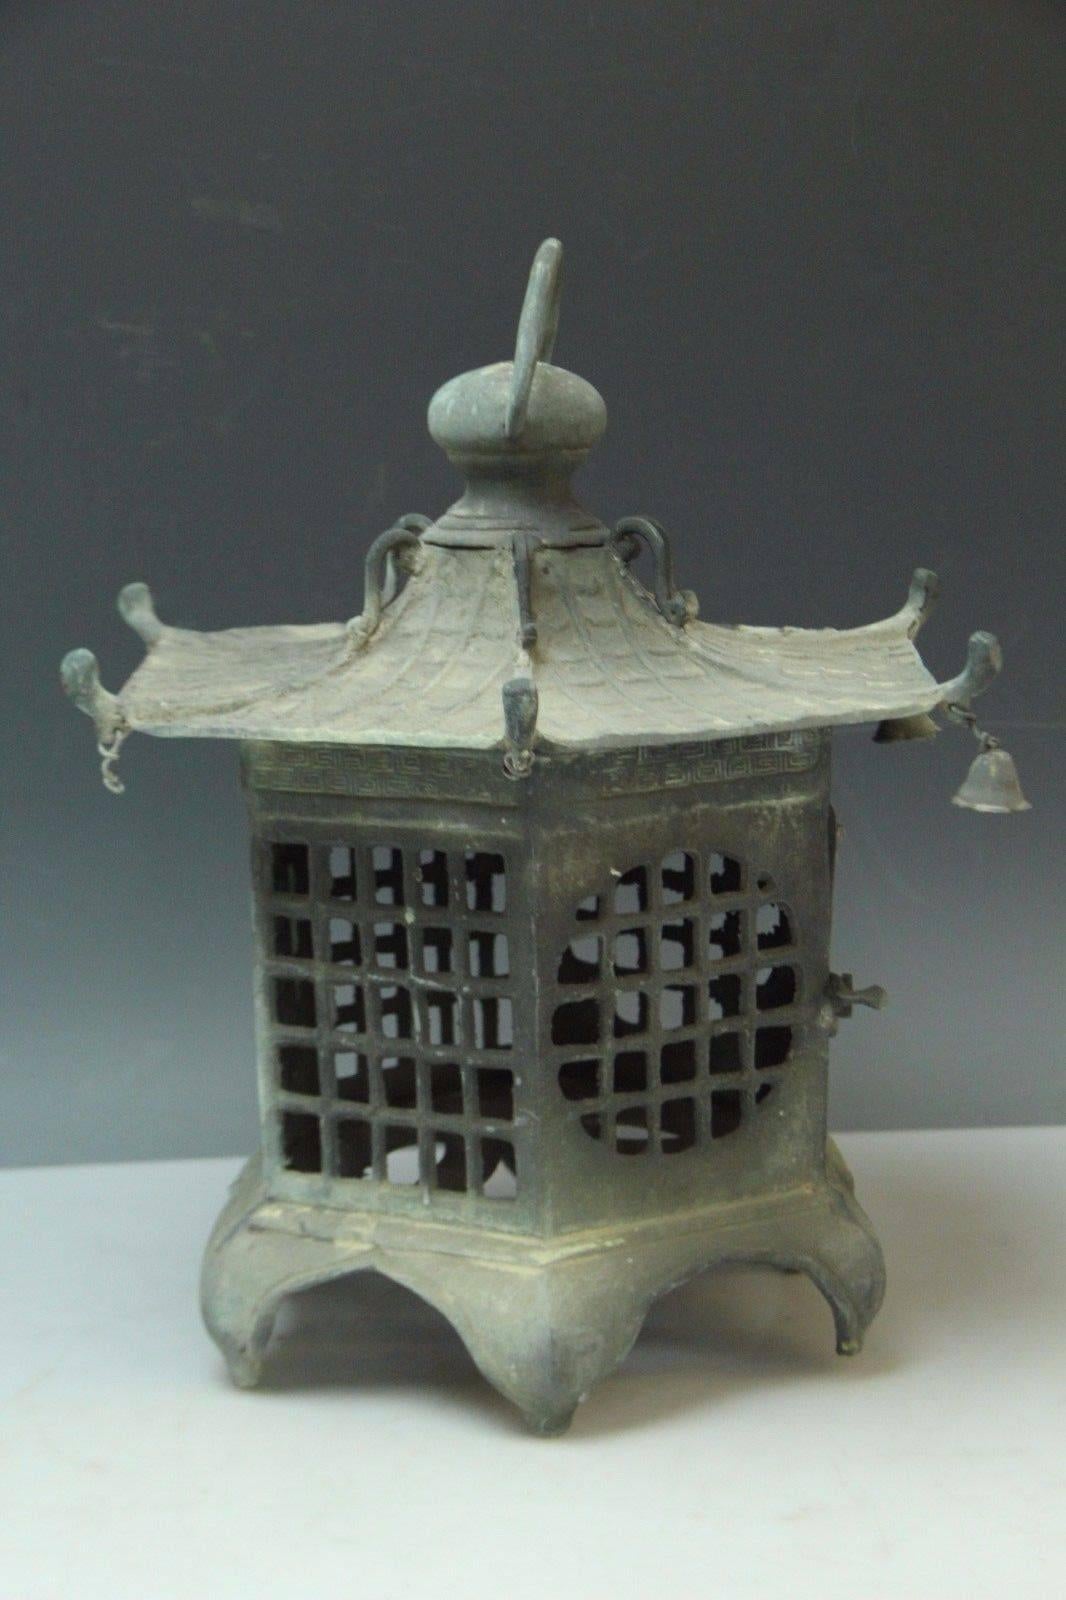 Here's a beautiful and unique way to accent your indoor or outdoor garden space with this wonderful old treasure from Japan!

This is a bronze casting of a wonderful pagoda form lantern dating to the Taisho period, 1912-1926

It is fully